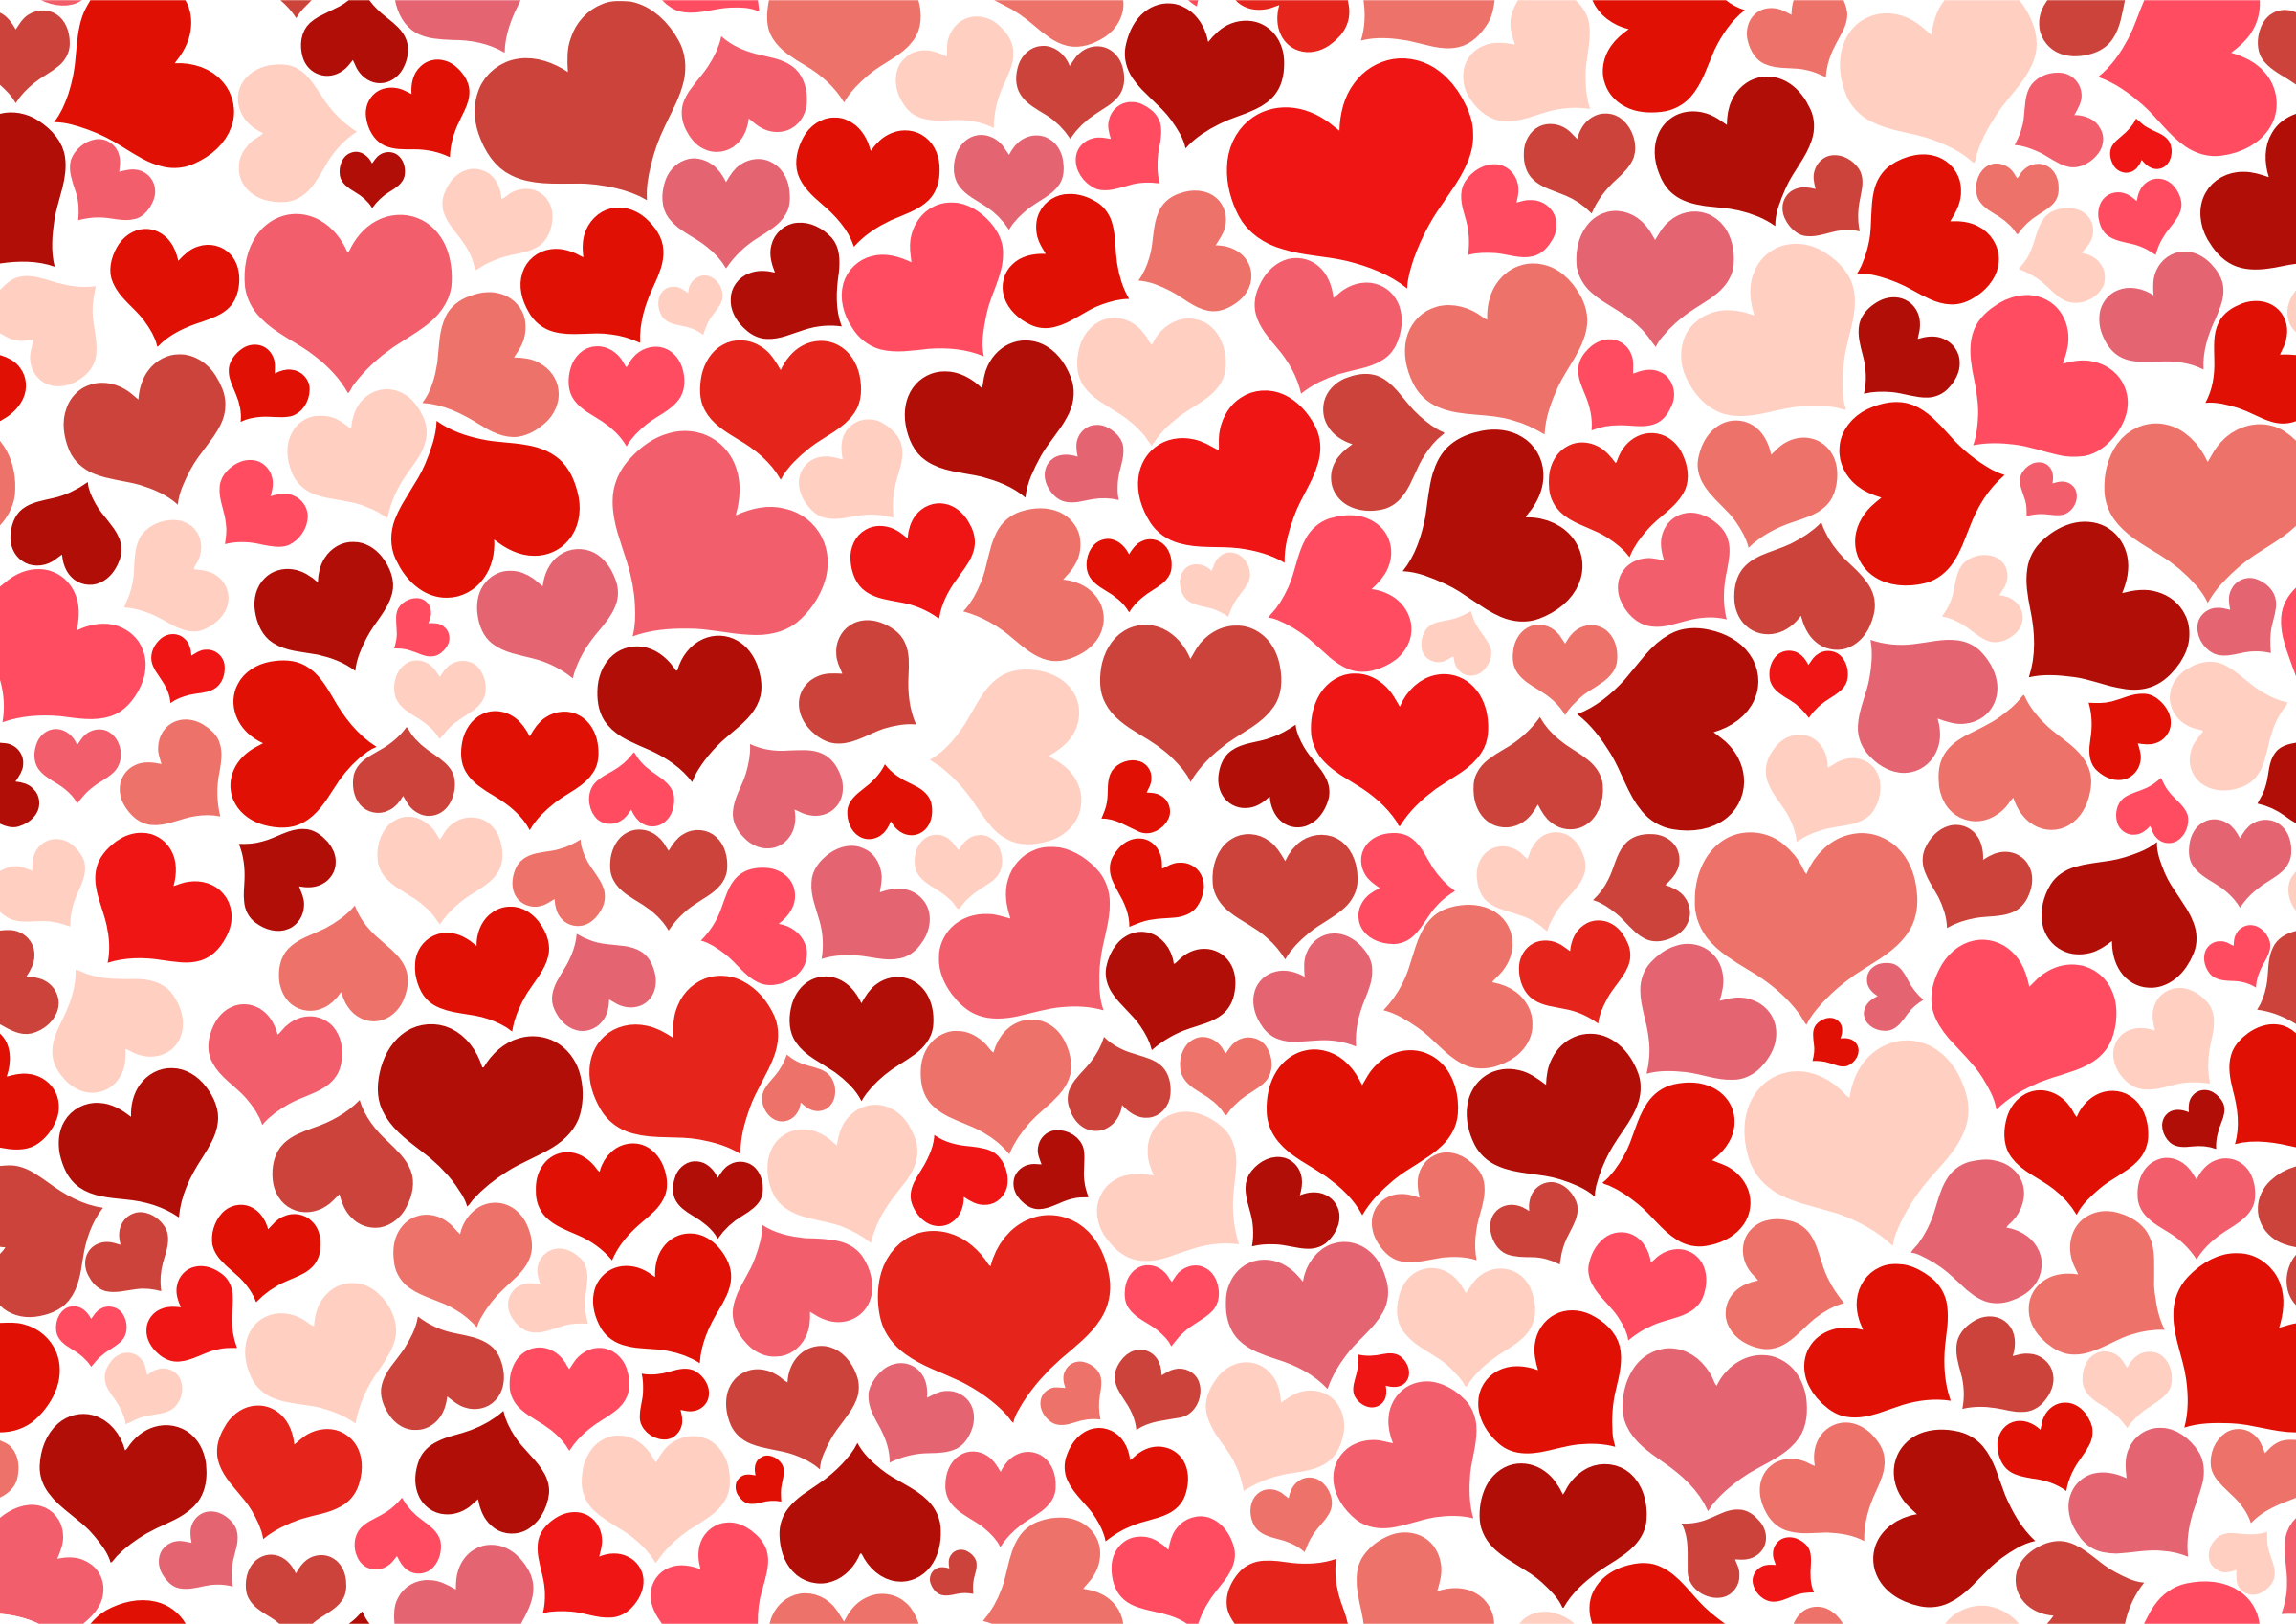 Hearts Background Images amp Pictures   Becuo